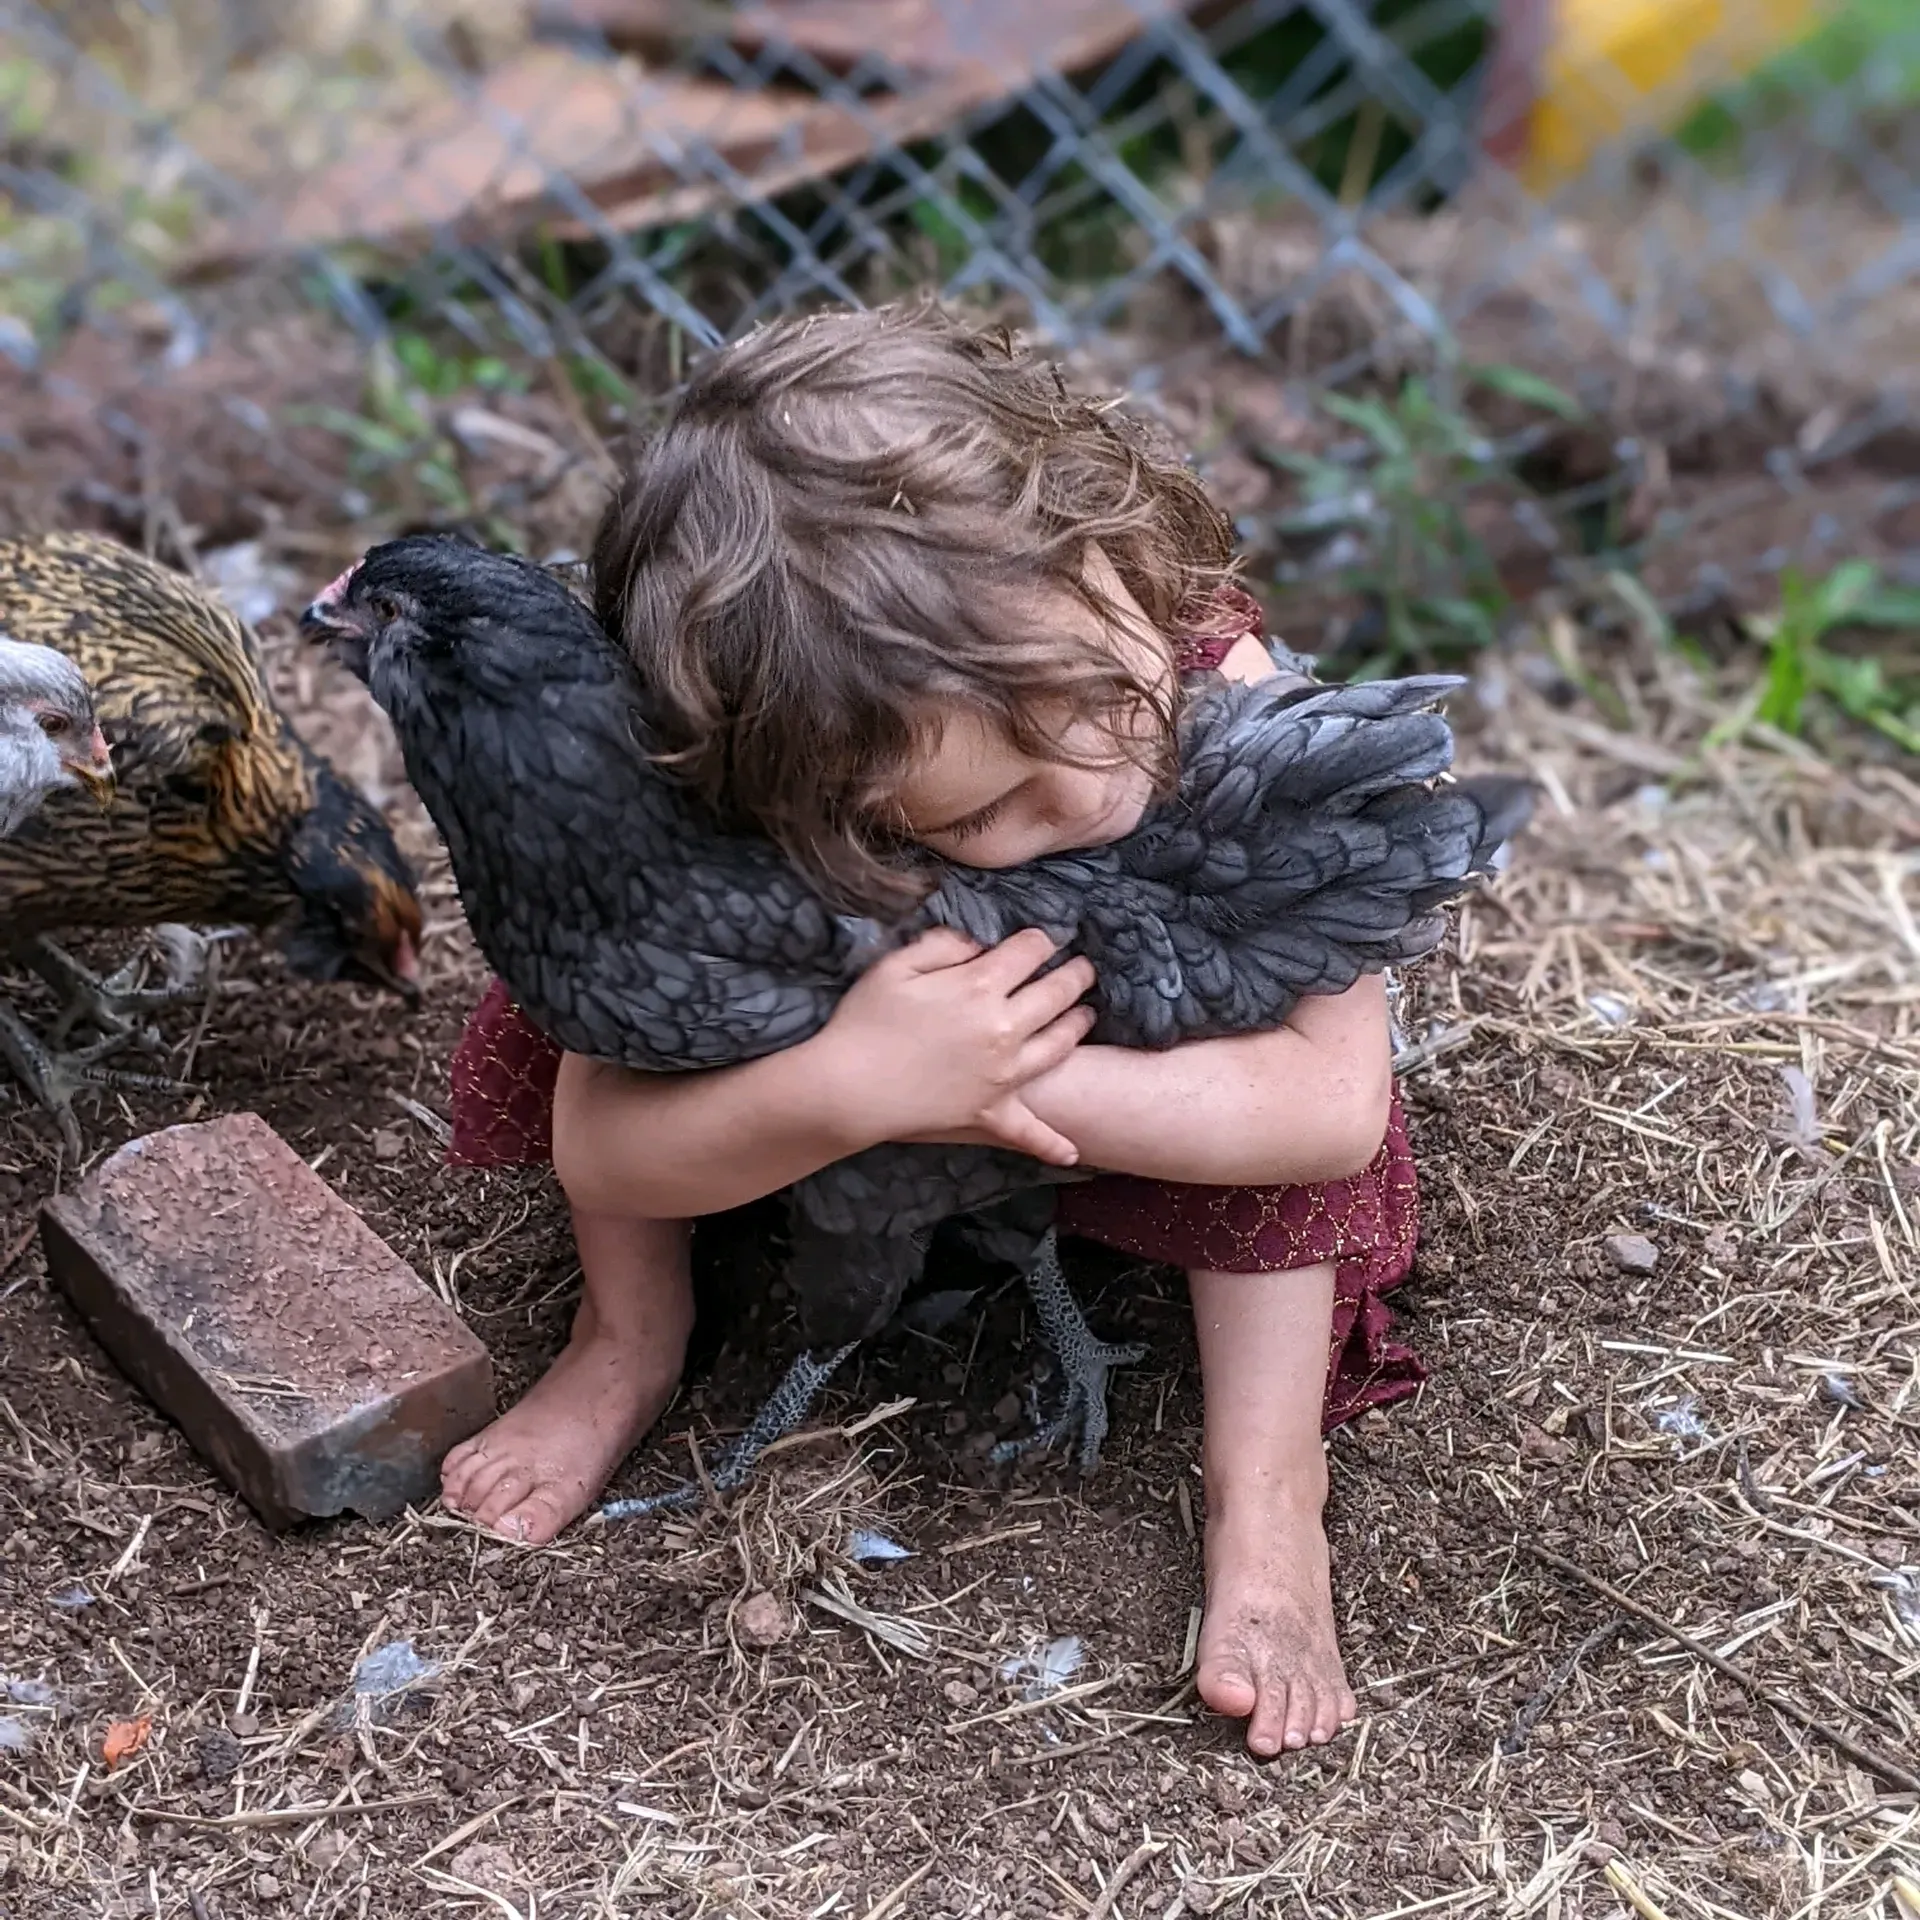 Our middle kiddo is sweet and snuggly and loves to take care of our chickens.